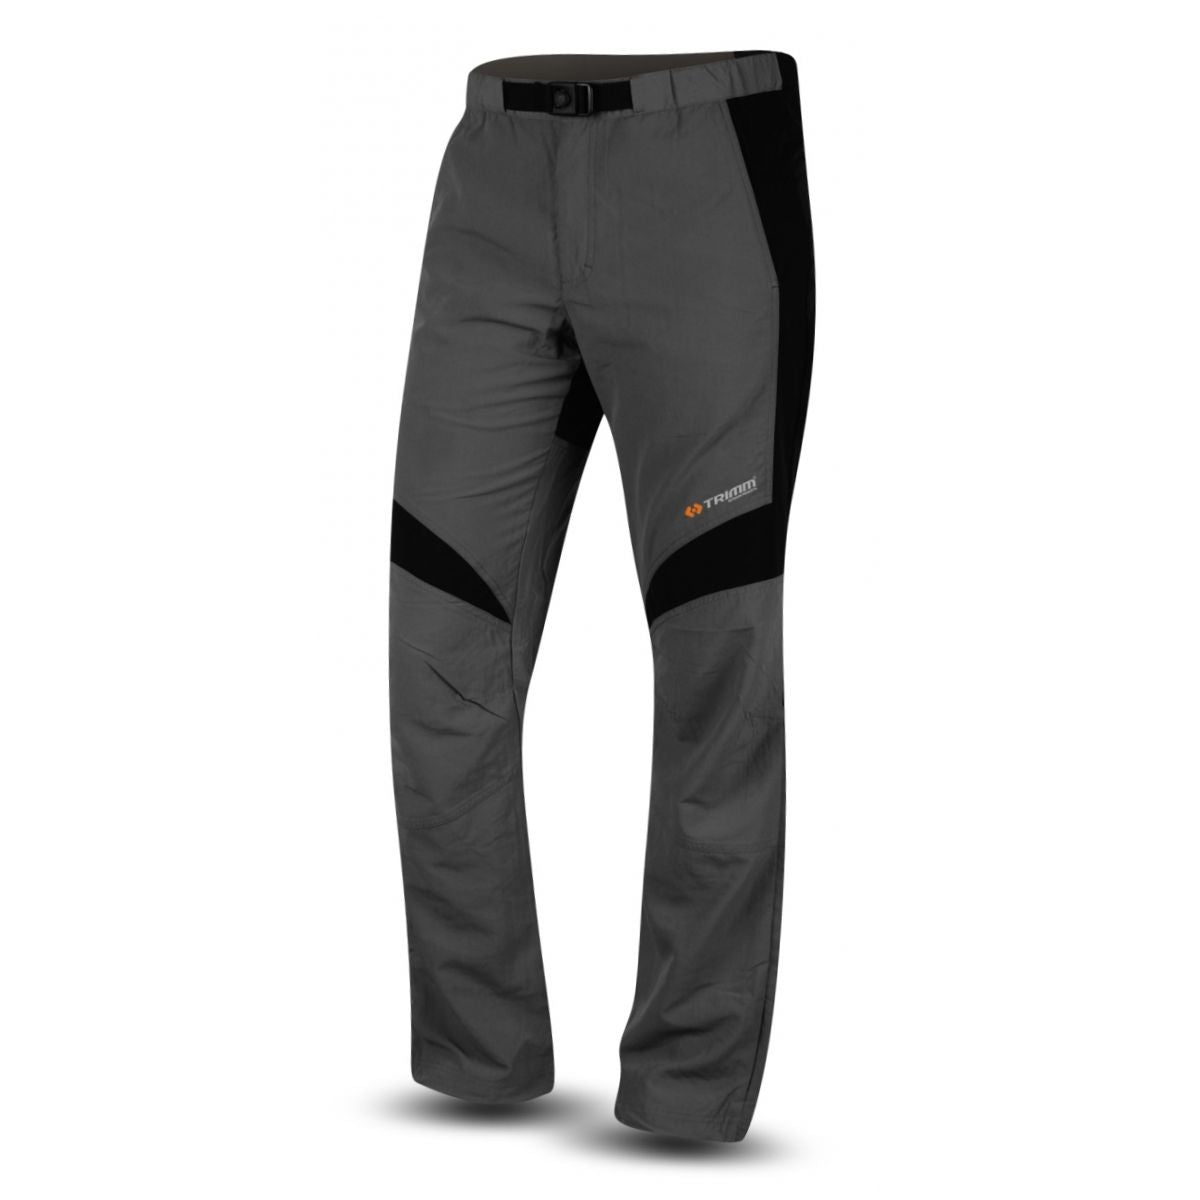 Direct Outdoor Pants - Adventure Trousers - Hiking and Travel Pants - Grey 1